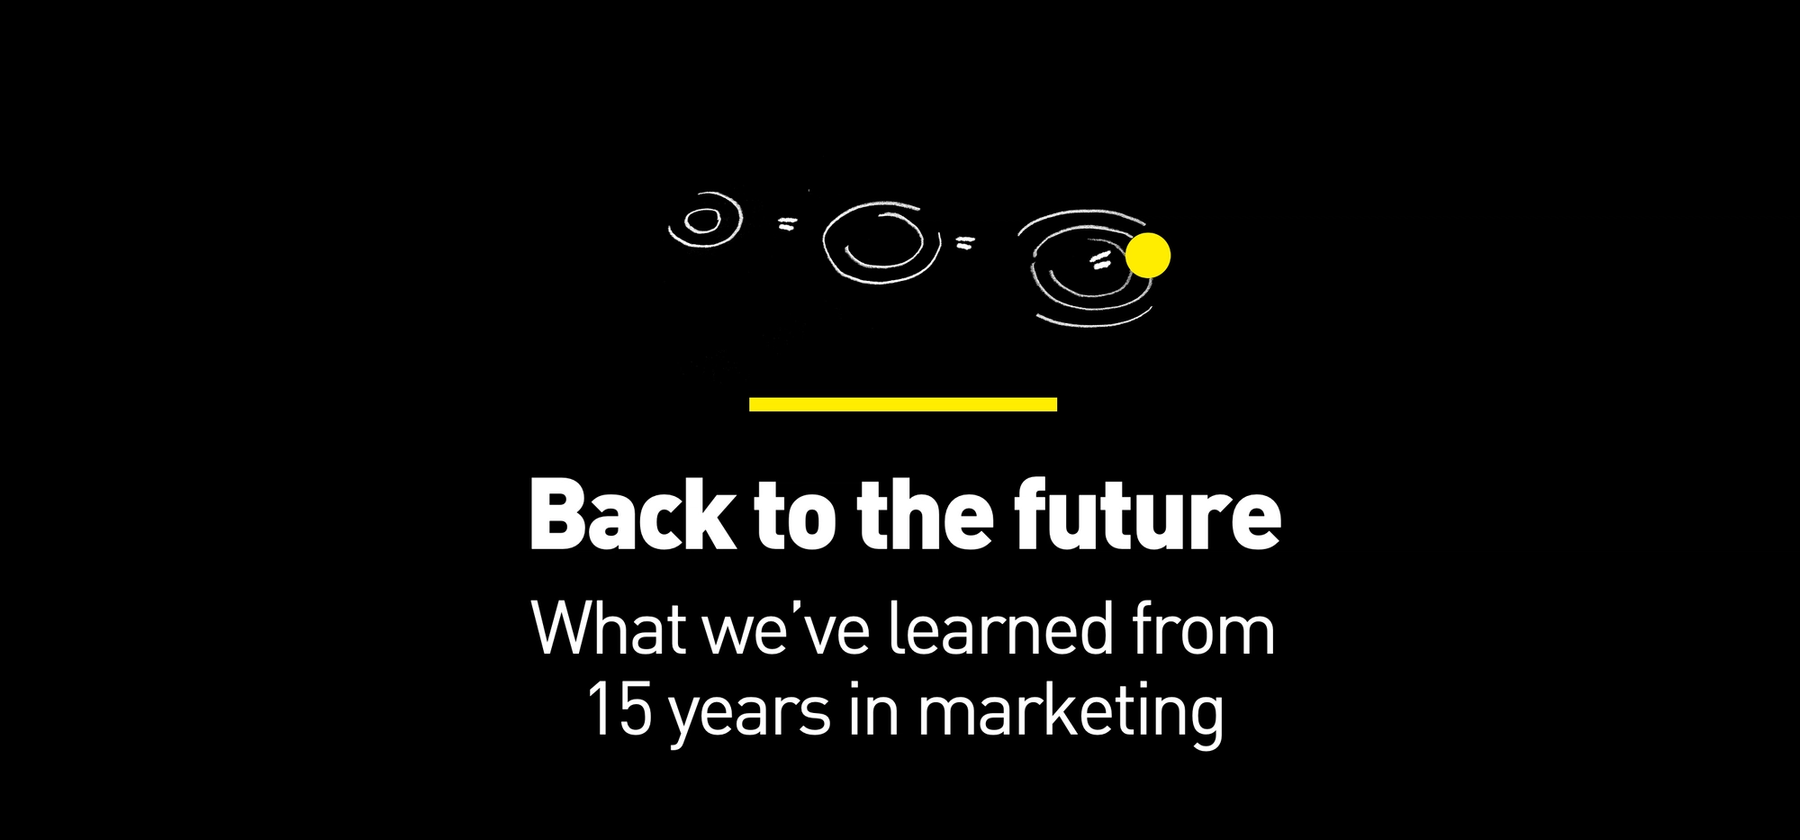 psLondon | What we’ve learned from 15 years in marketing